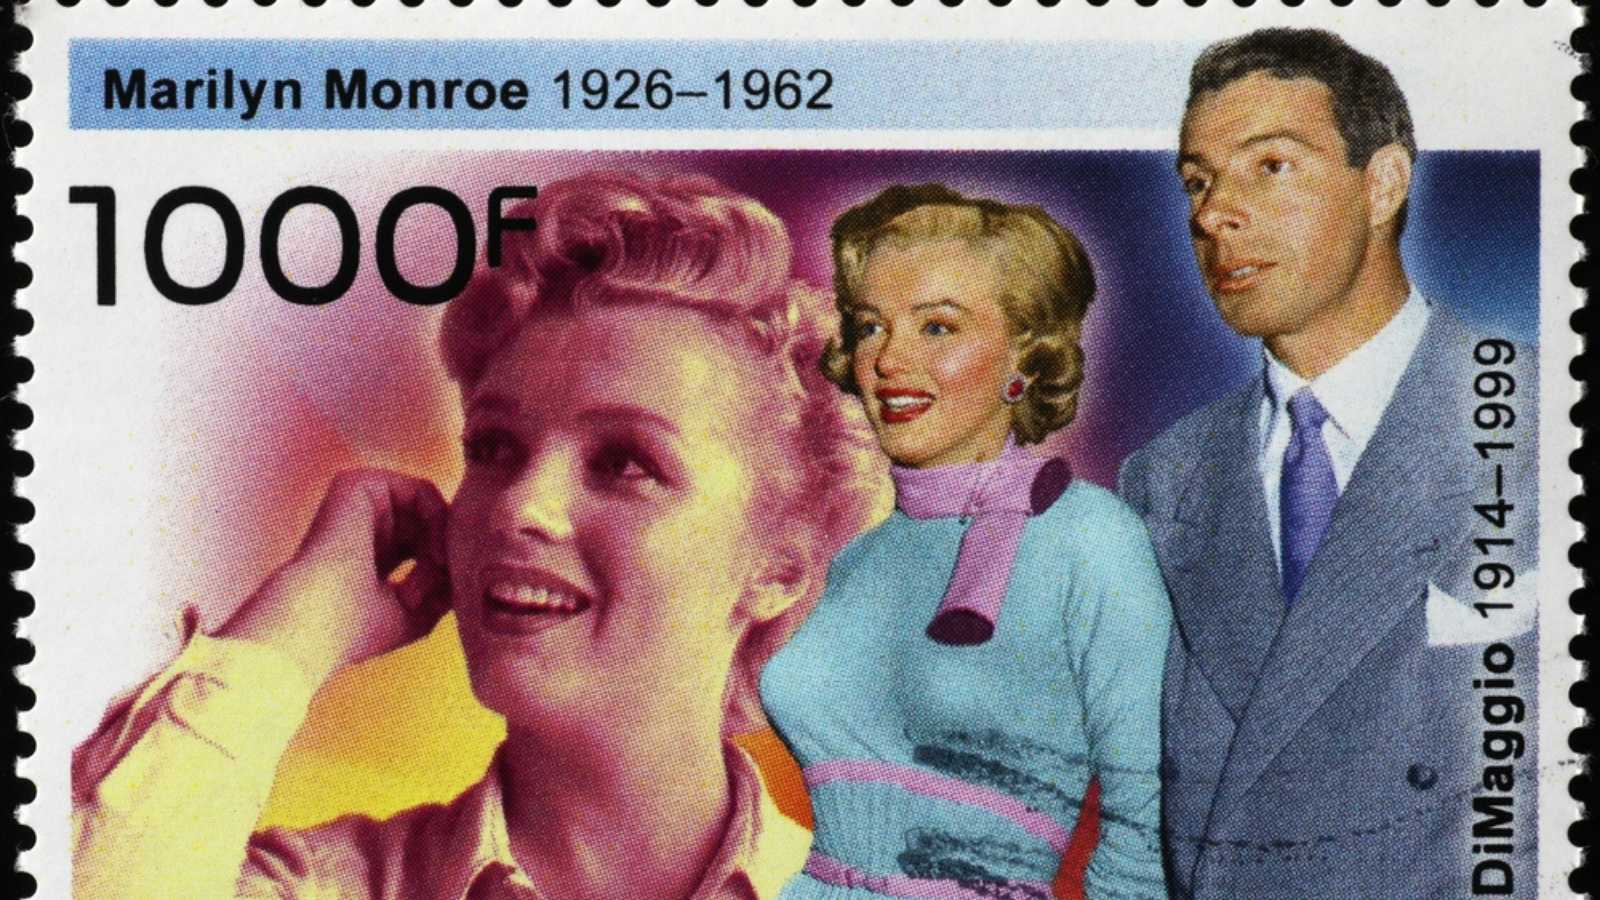 Milan, Italy - September 22, 2022: Marilyn Monroe and Joe Di Maggio on postage stamp from Togo